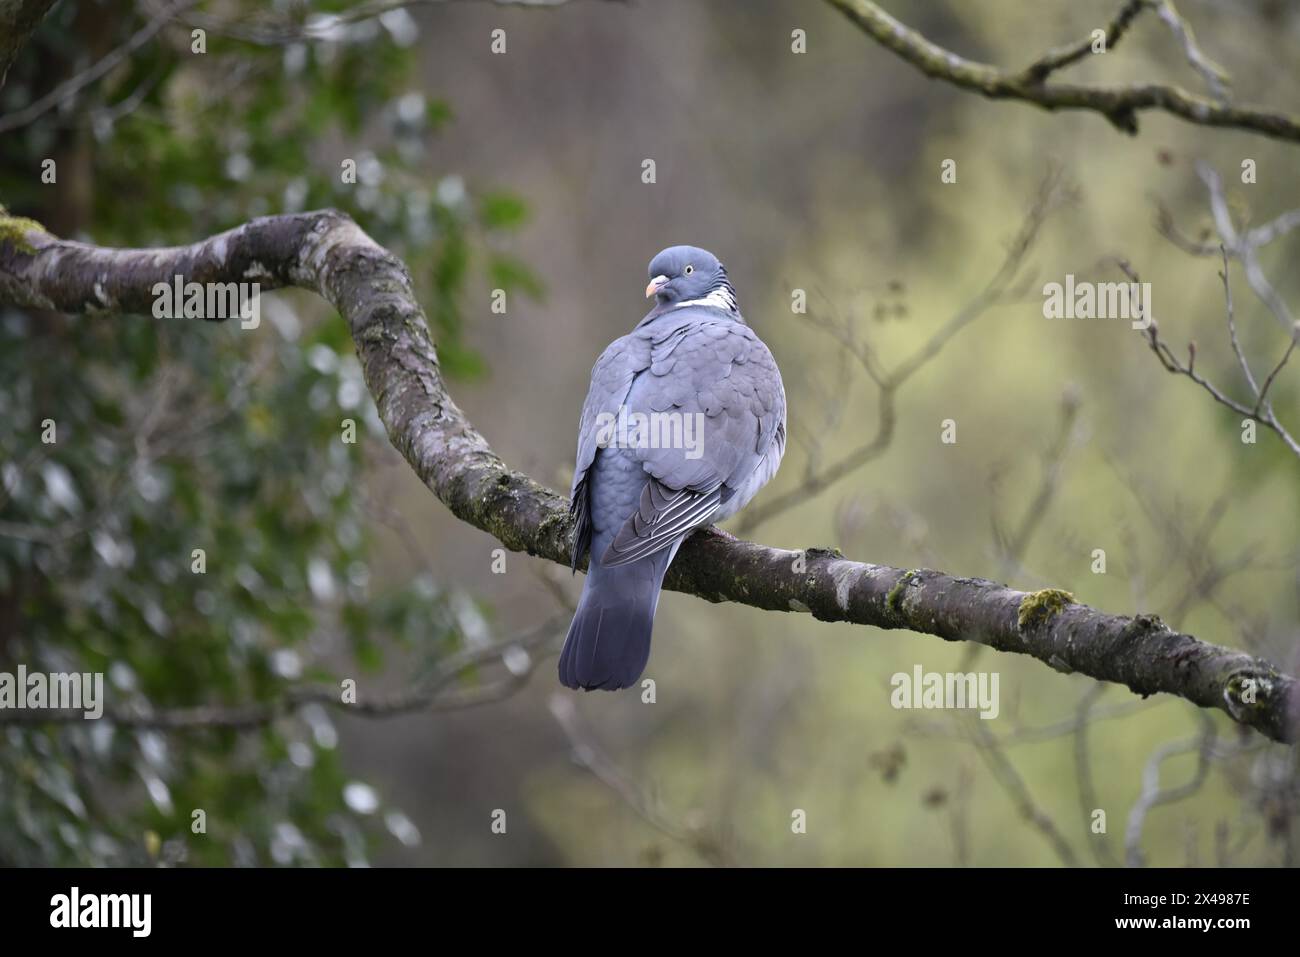 Close-Up Image of a Common Woodpigeon (Columba palumbus) Sitting on a Tree Branch with Back to Camera, and Head Turned Left to Look at Camera, in Wood Stock Photo